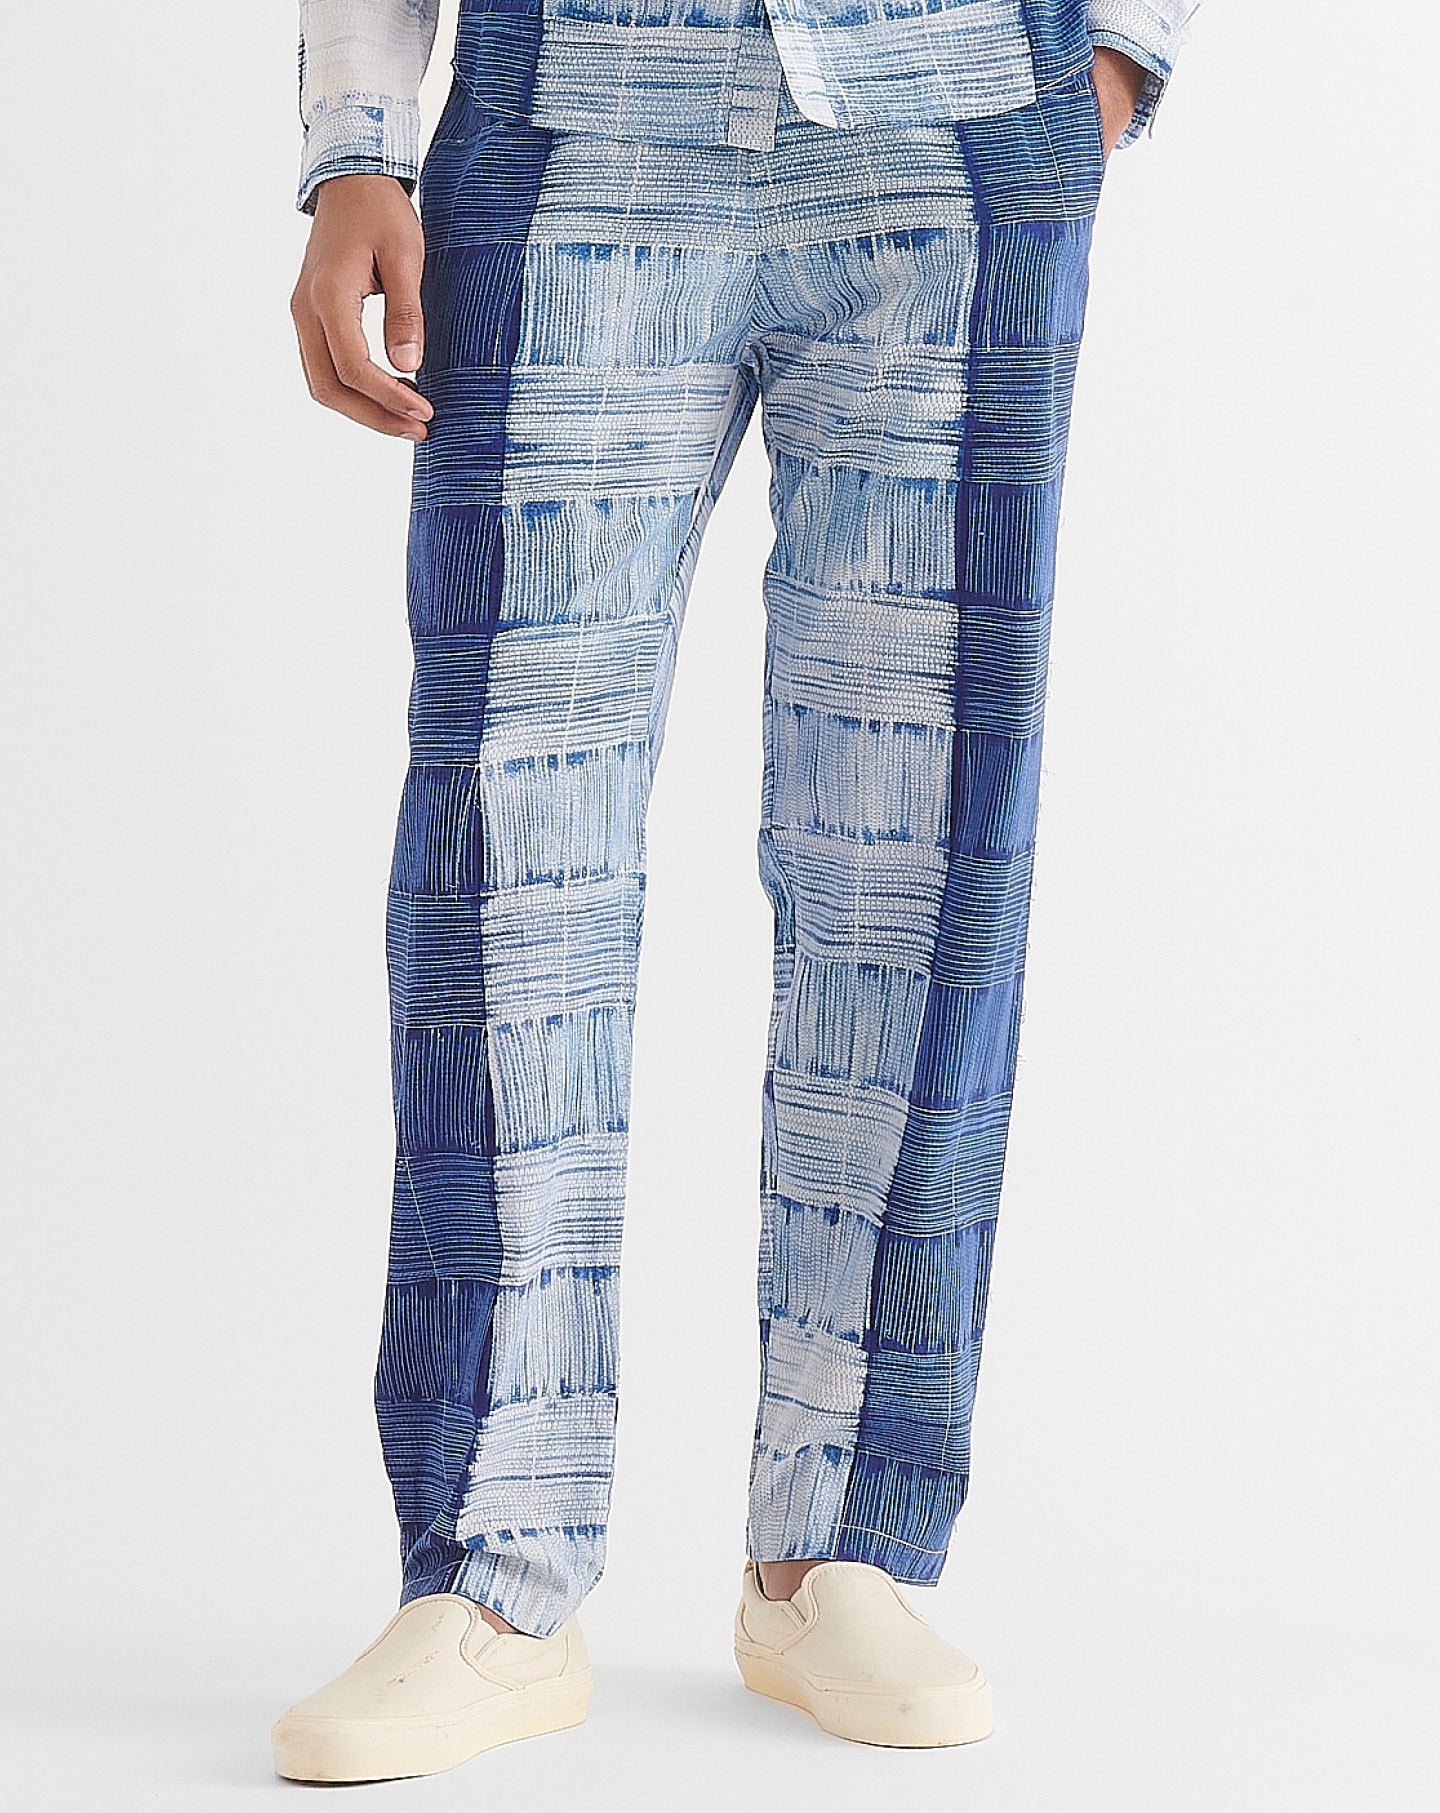 Malibu Trousers in White and Blue Tie-Dye